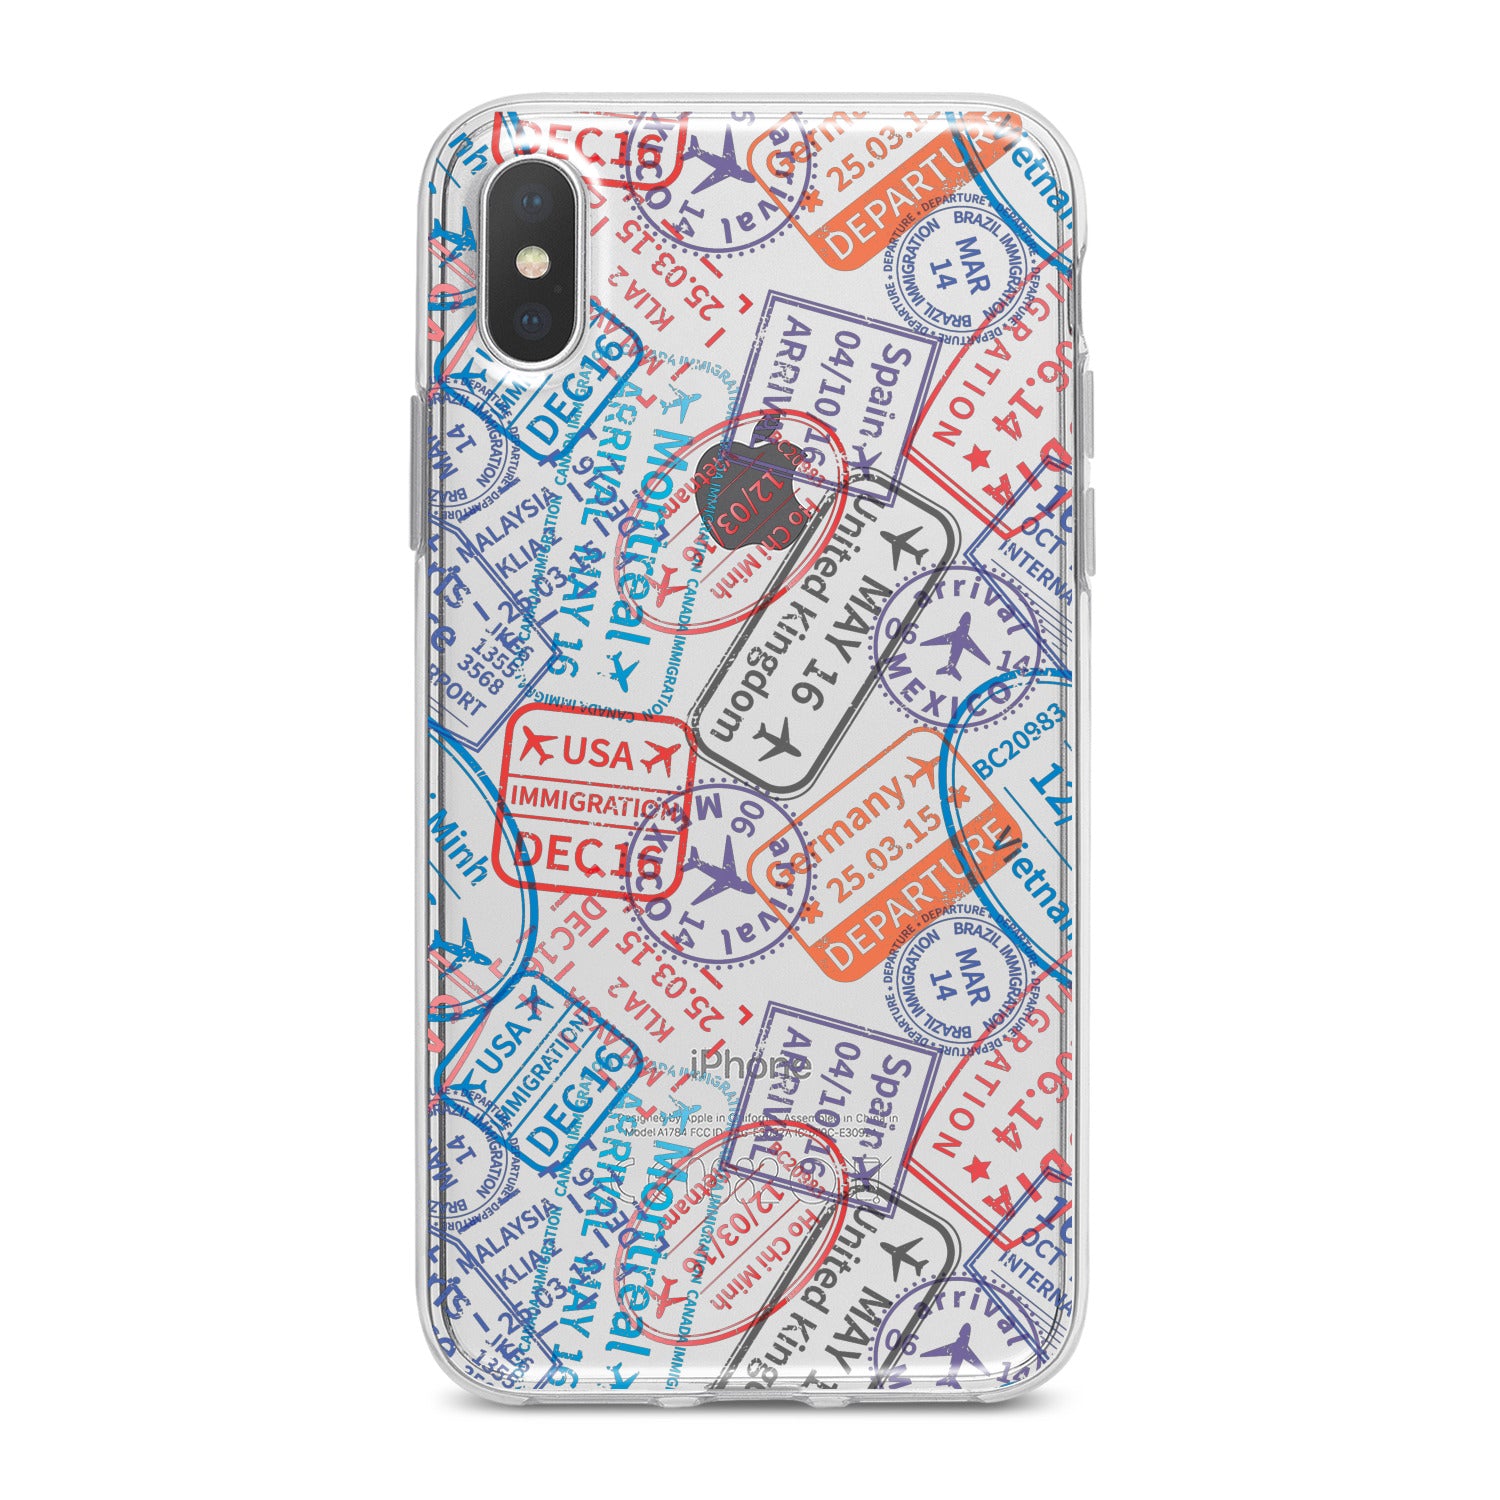 Lex Altern Colored Stamps Phone Case for your iPhone & Android phone.